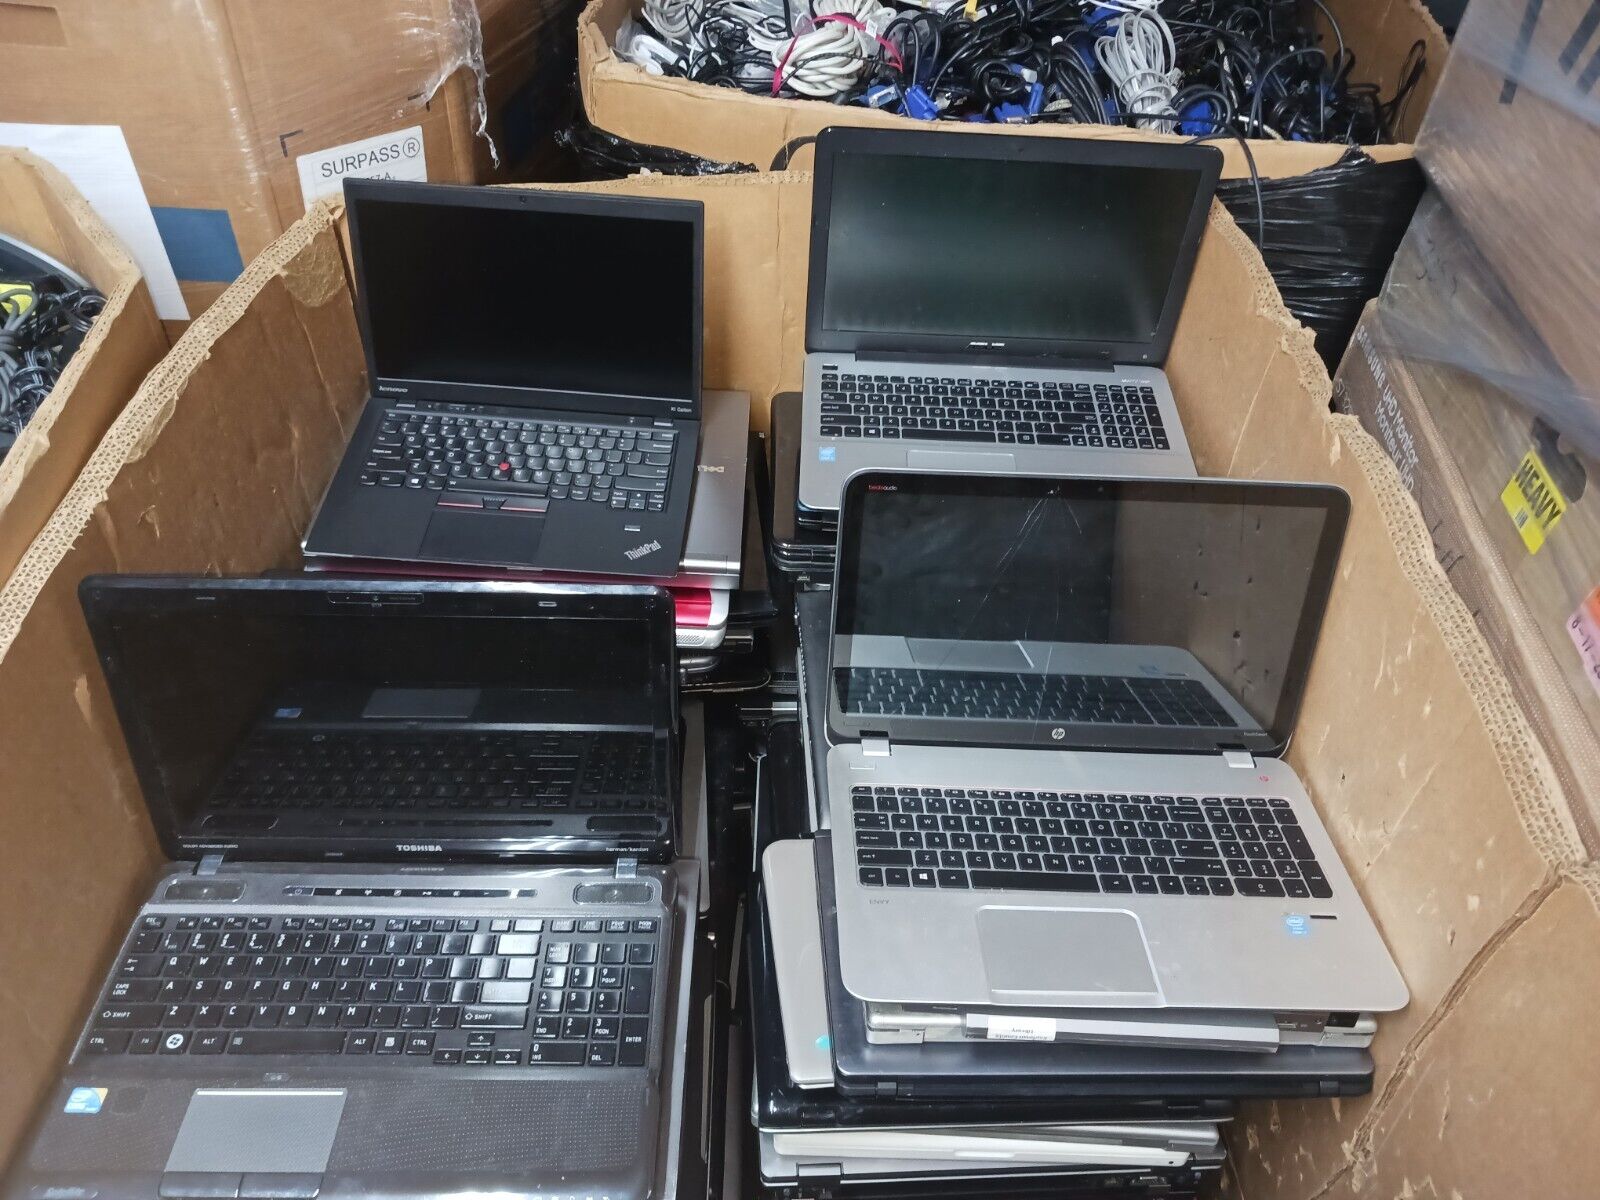 5 (LOT OF FIVE LAPTOPS) FOR PARTS - Will pick 5 from the pallet RANDON MIX -ASIS